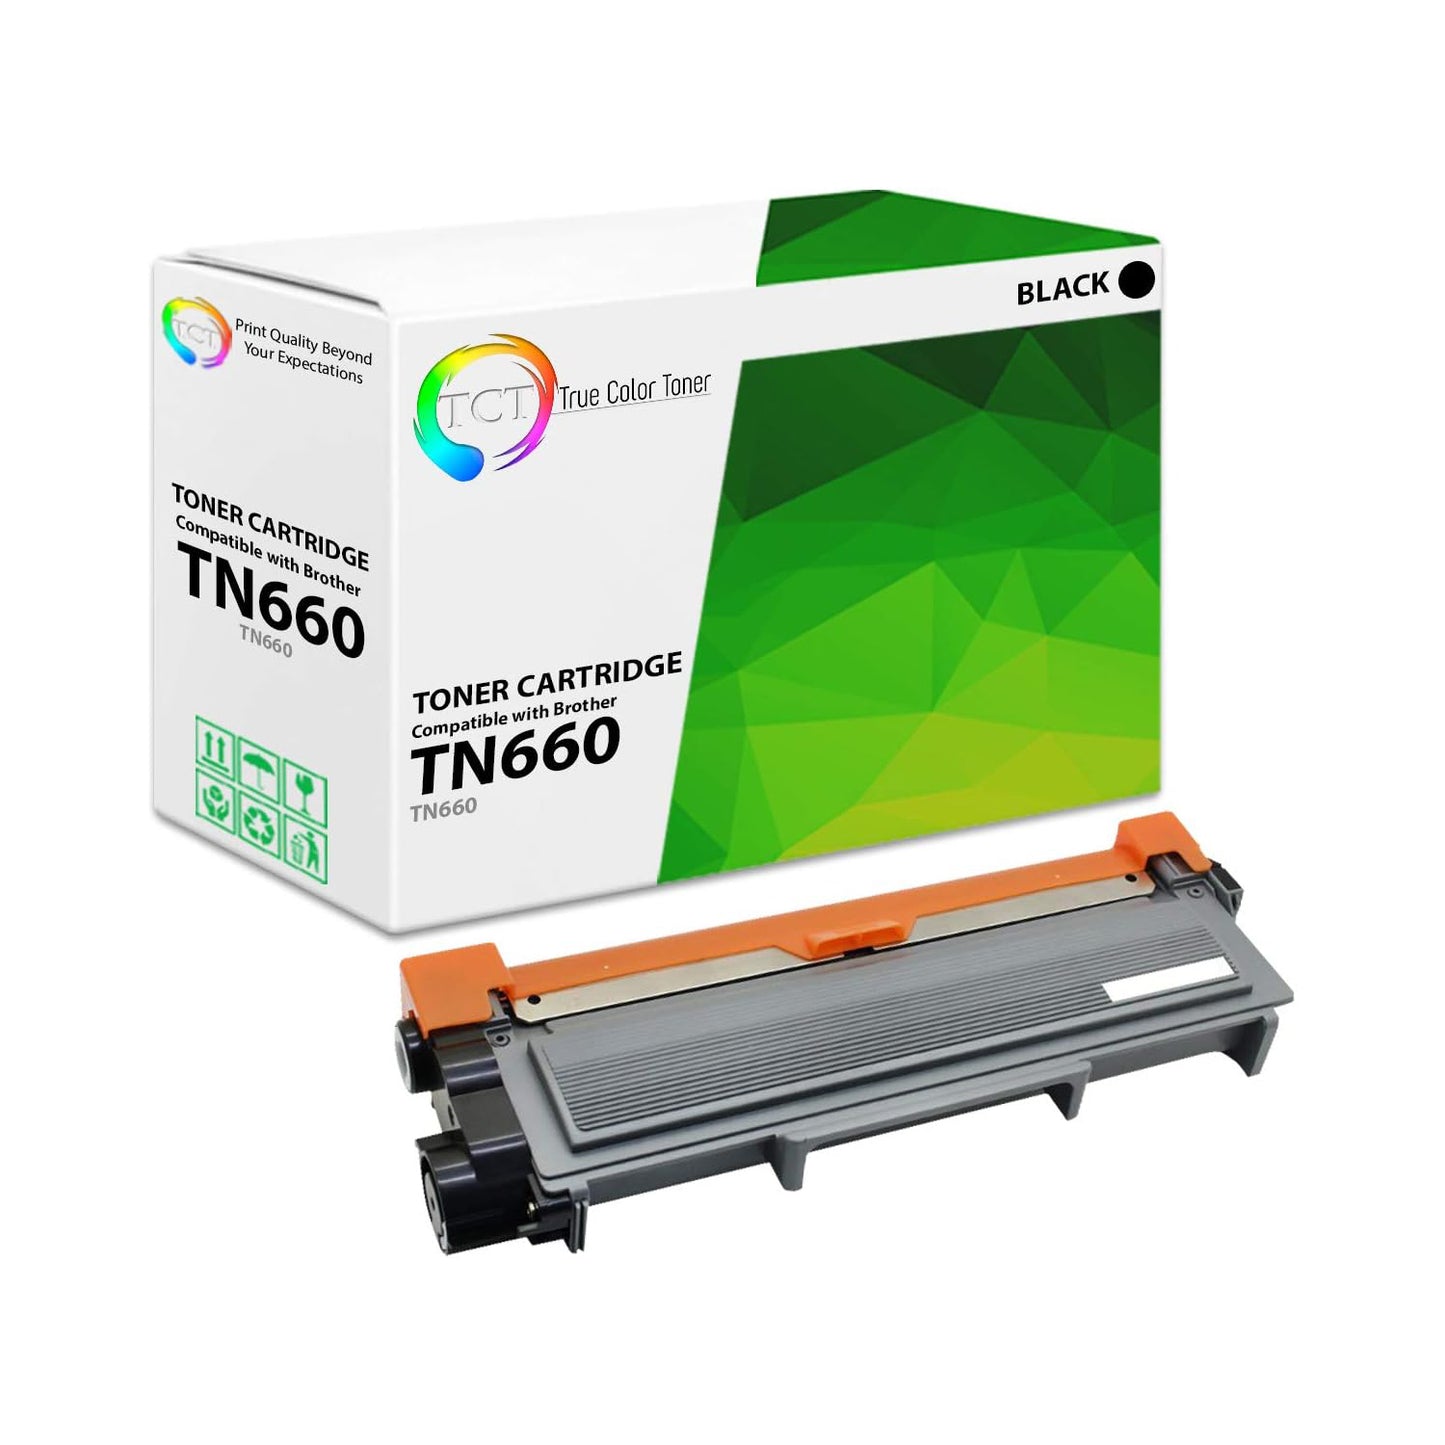 TCT Compatible High Yield Toner Cartridge Replacement for the Brother TN660 Series - 1 Pack Black